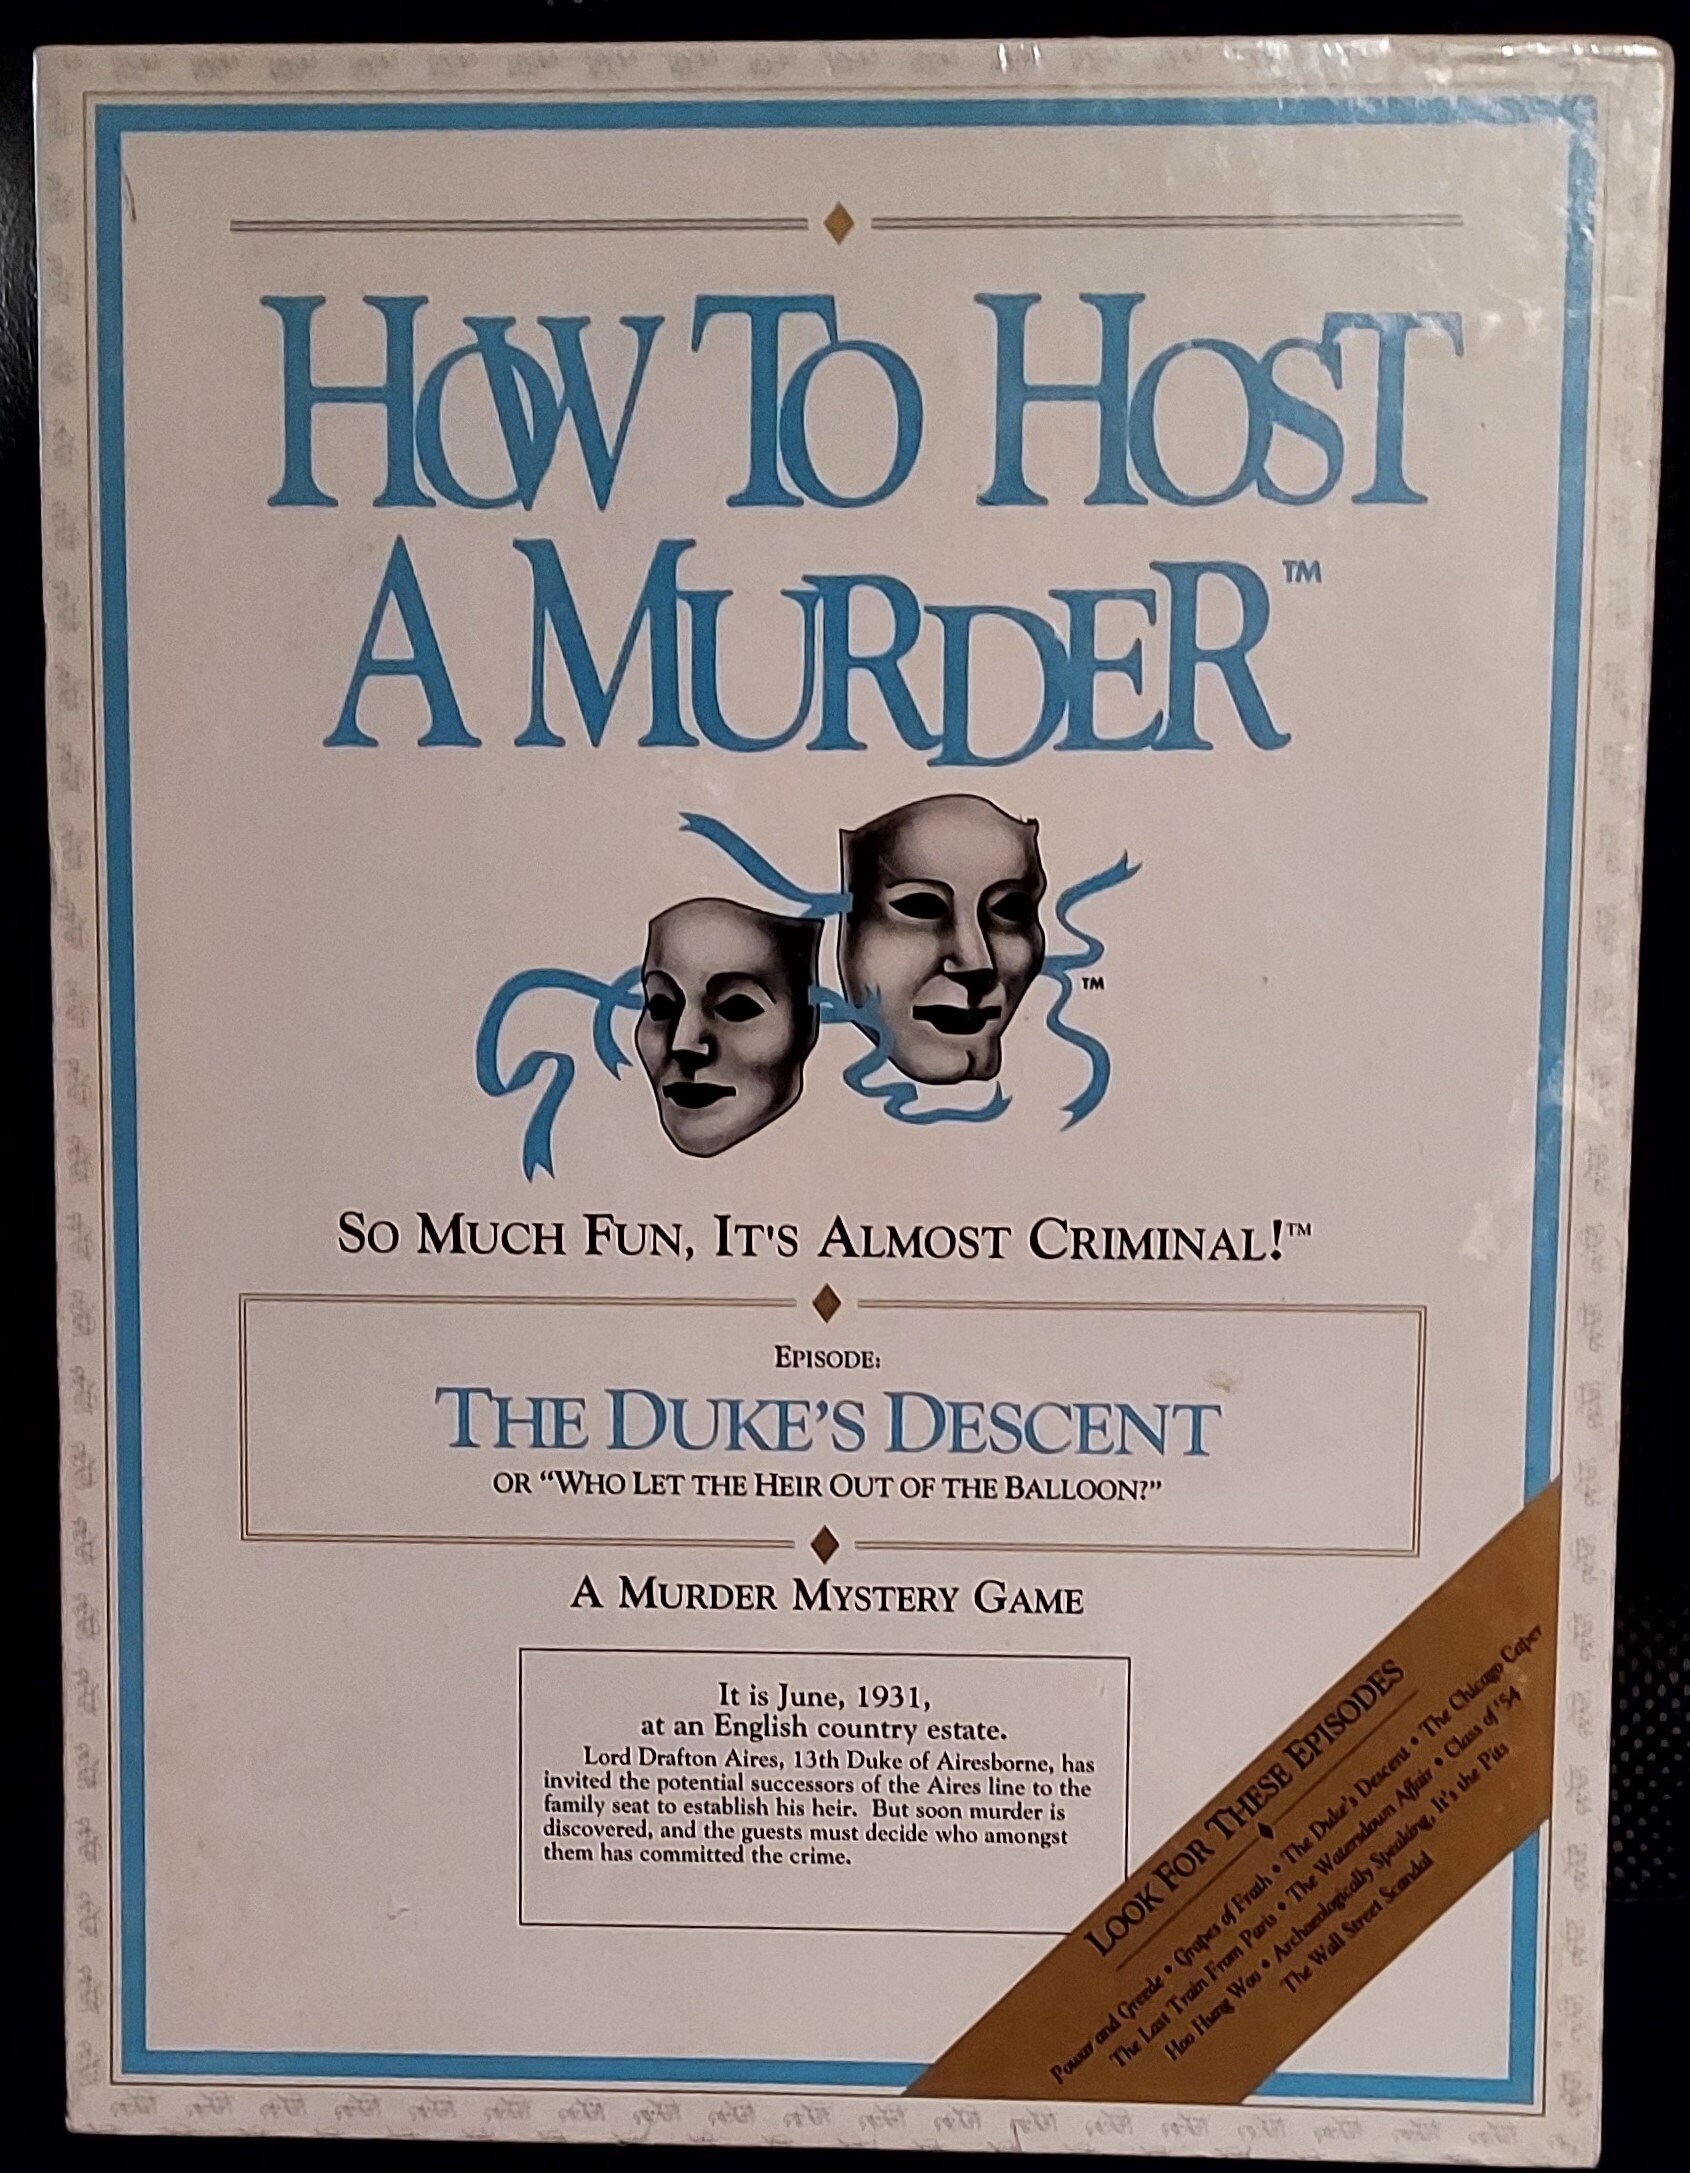 How to Host a Murder Mystery Party - Sammy D. Vintage